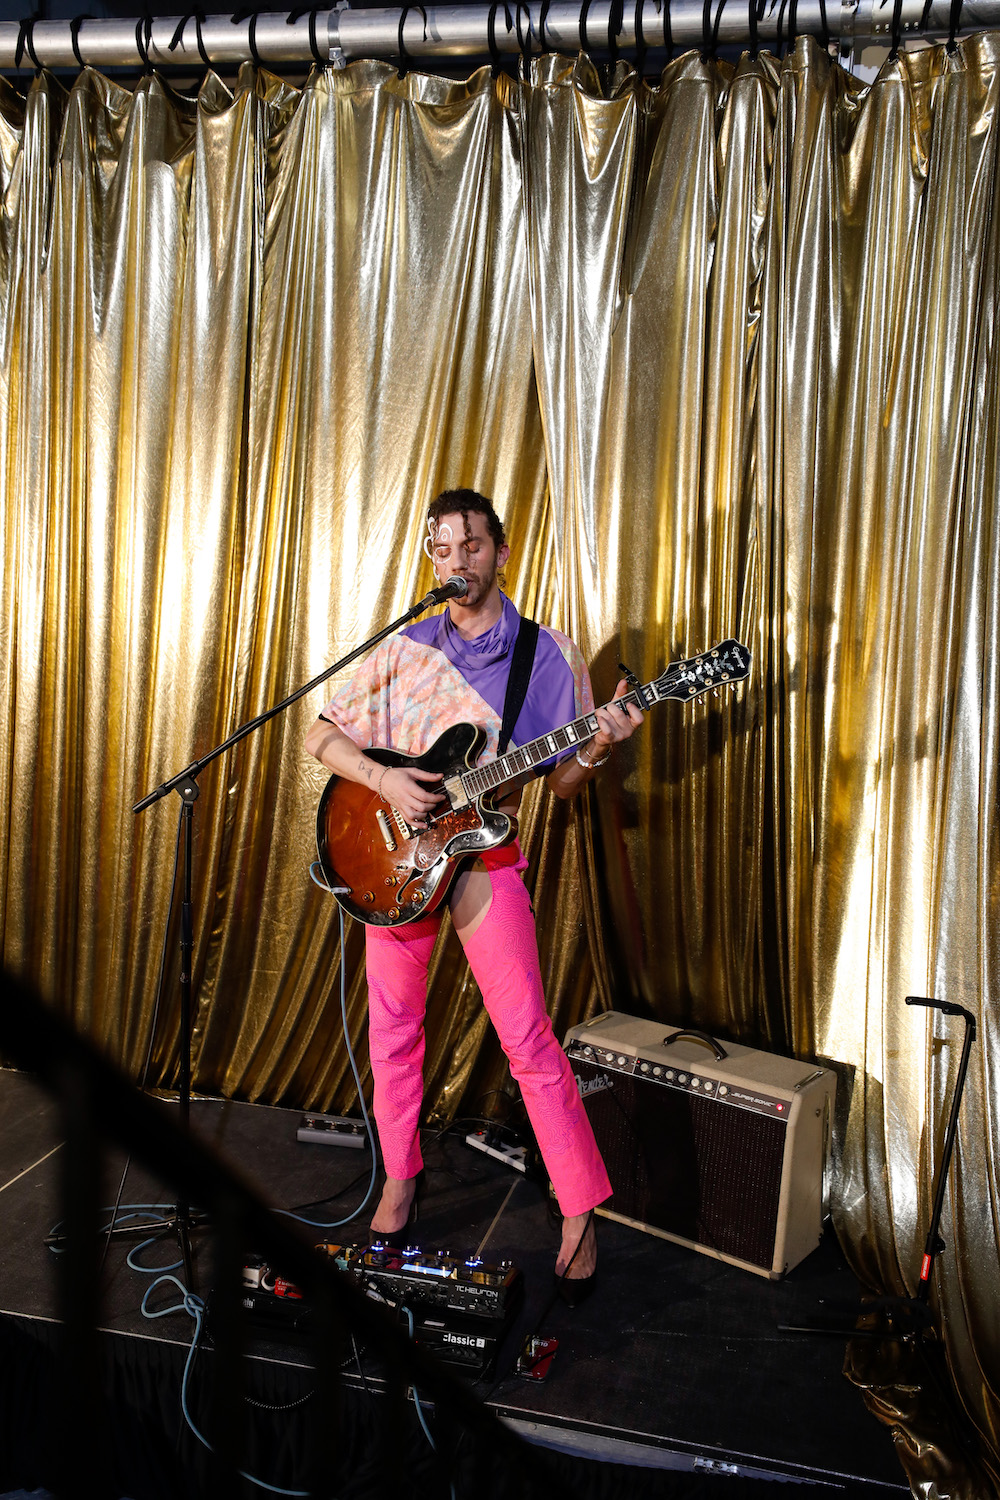 Singer and guitarist Leone performing on stage dressed in a half purple, half multicolored top and bright pink pants by designer Cilium.